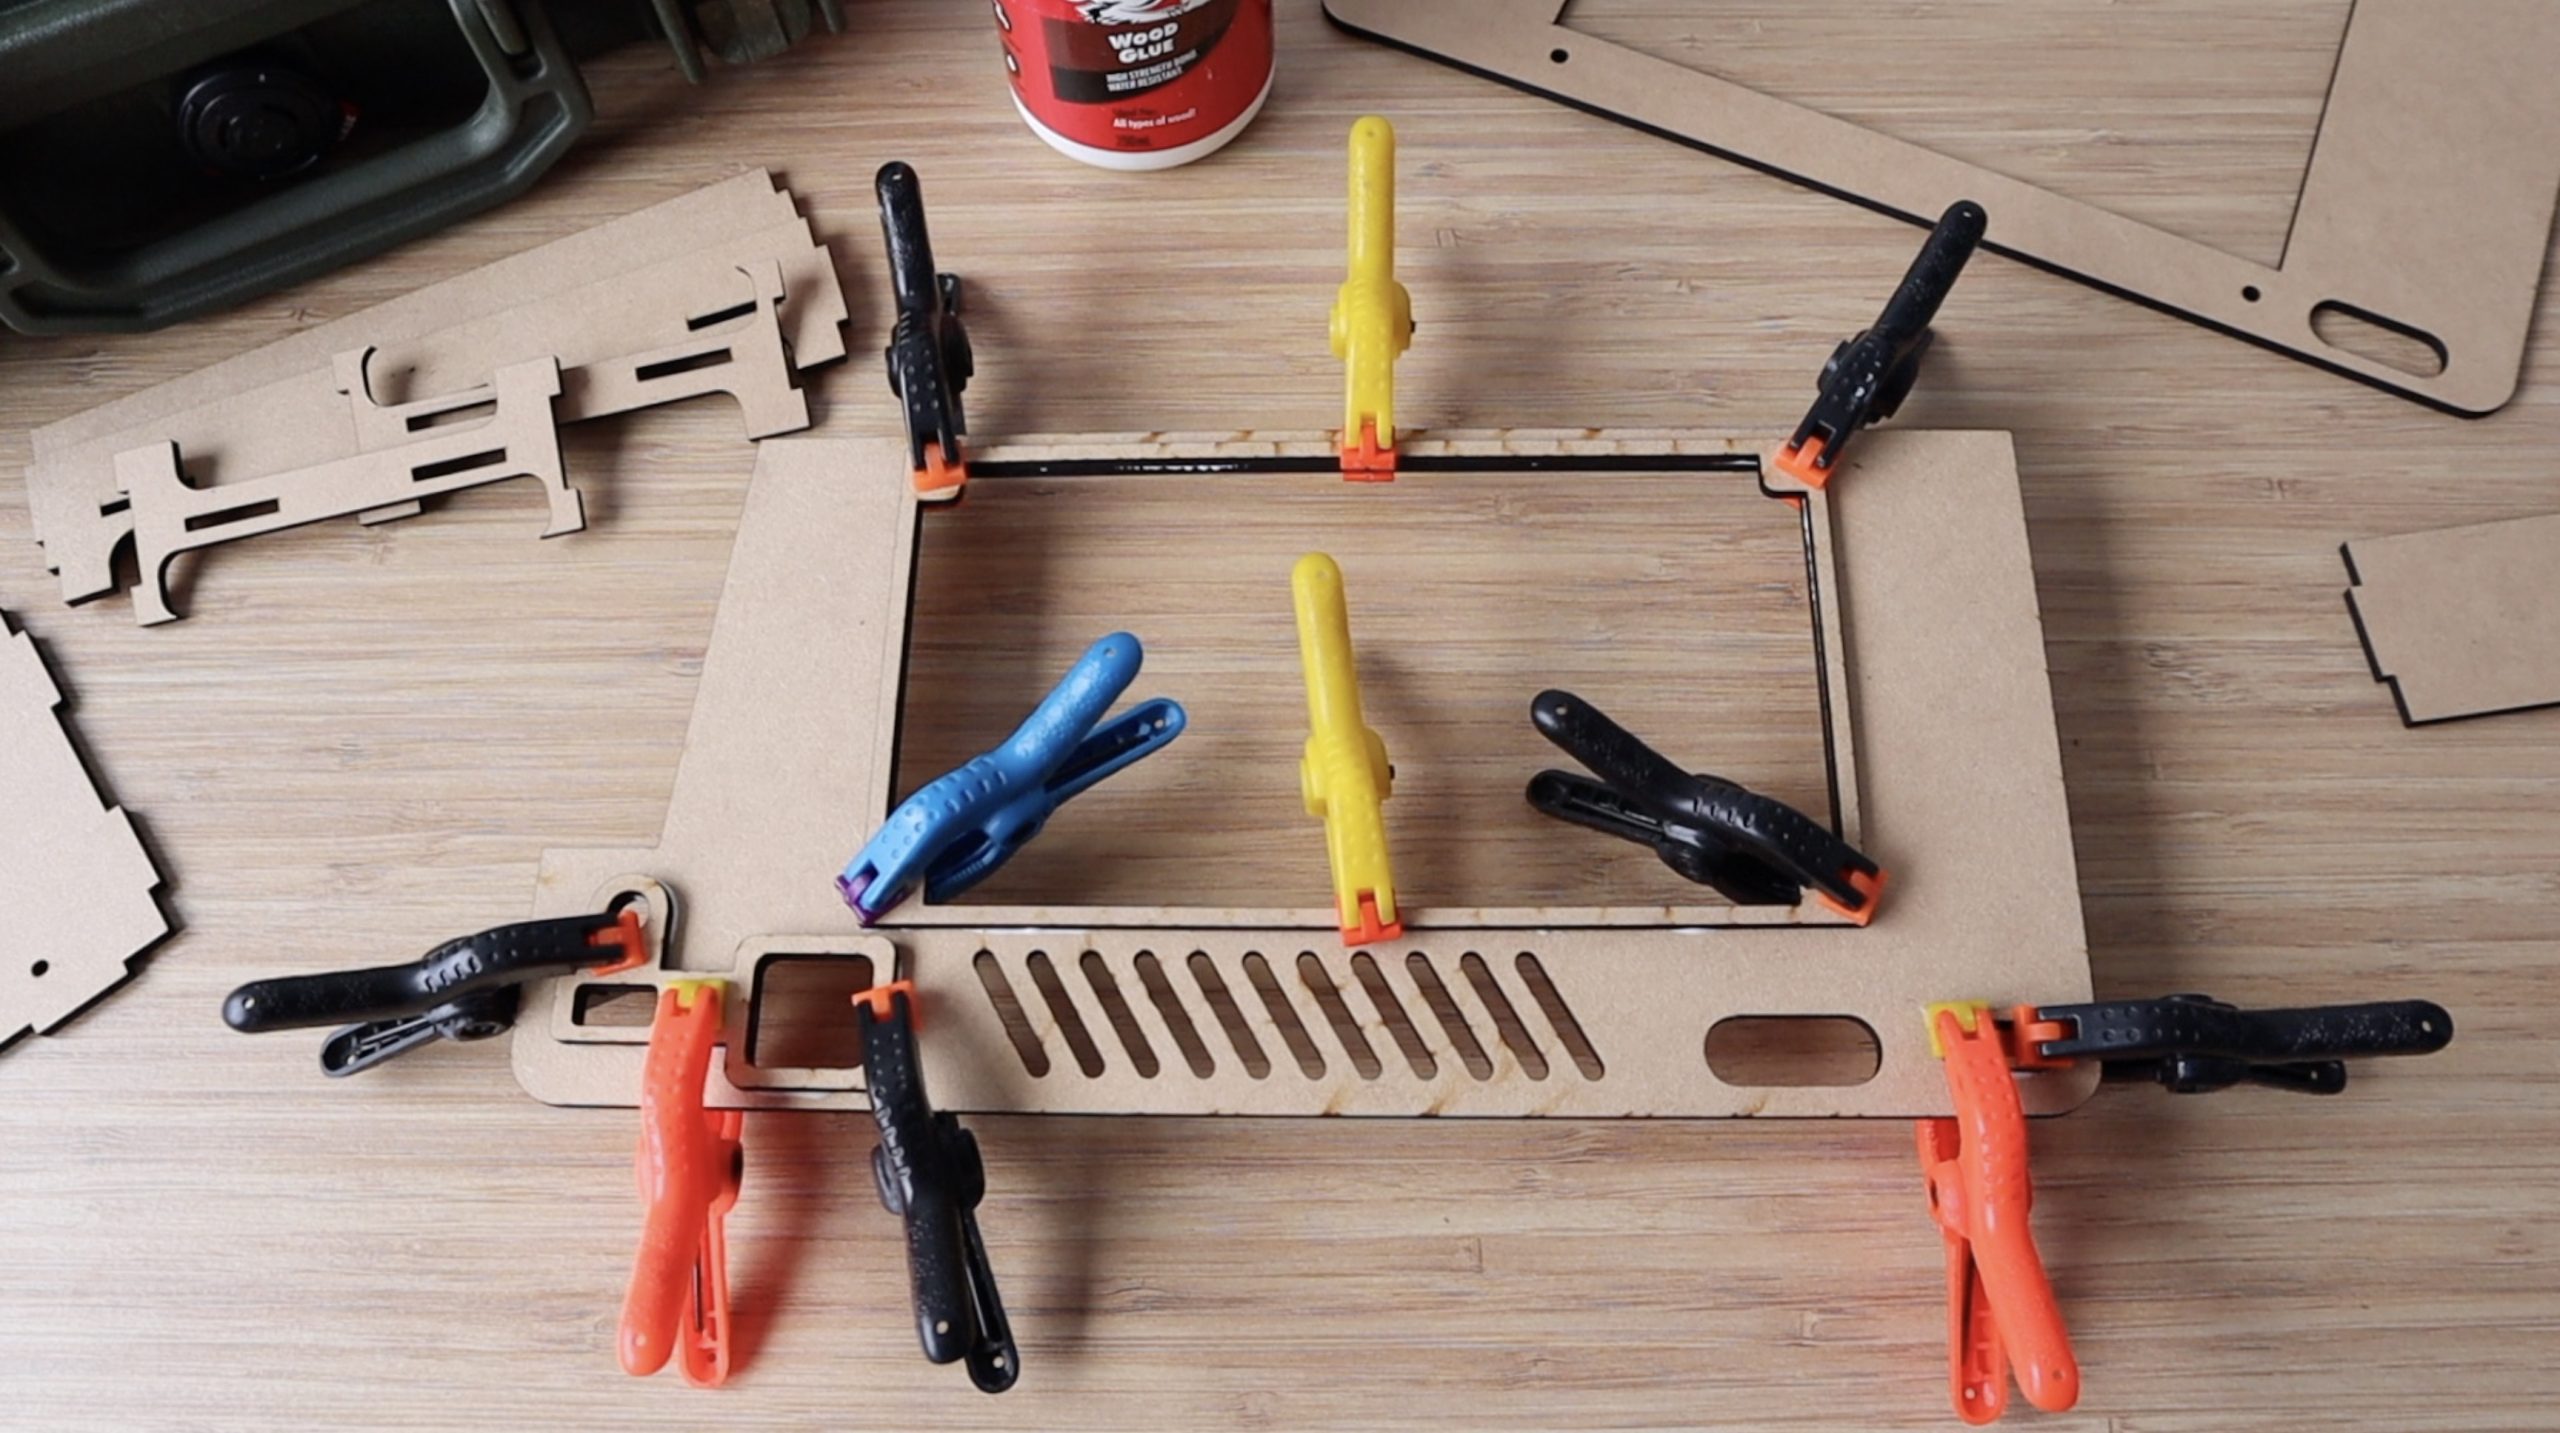 Gluing Components Together